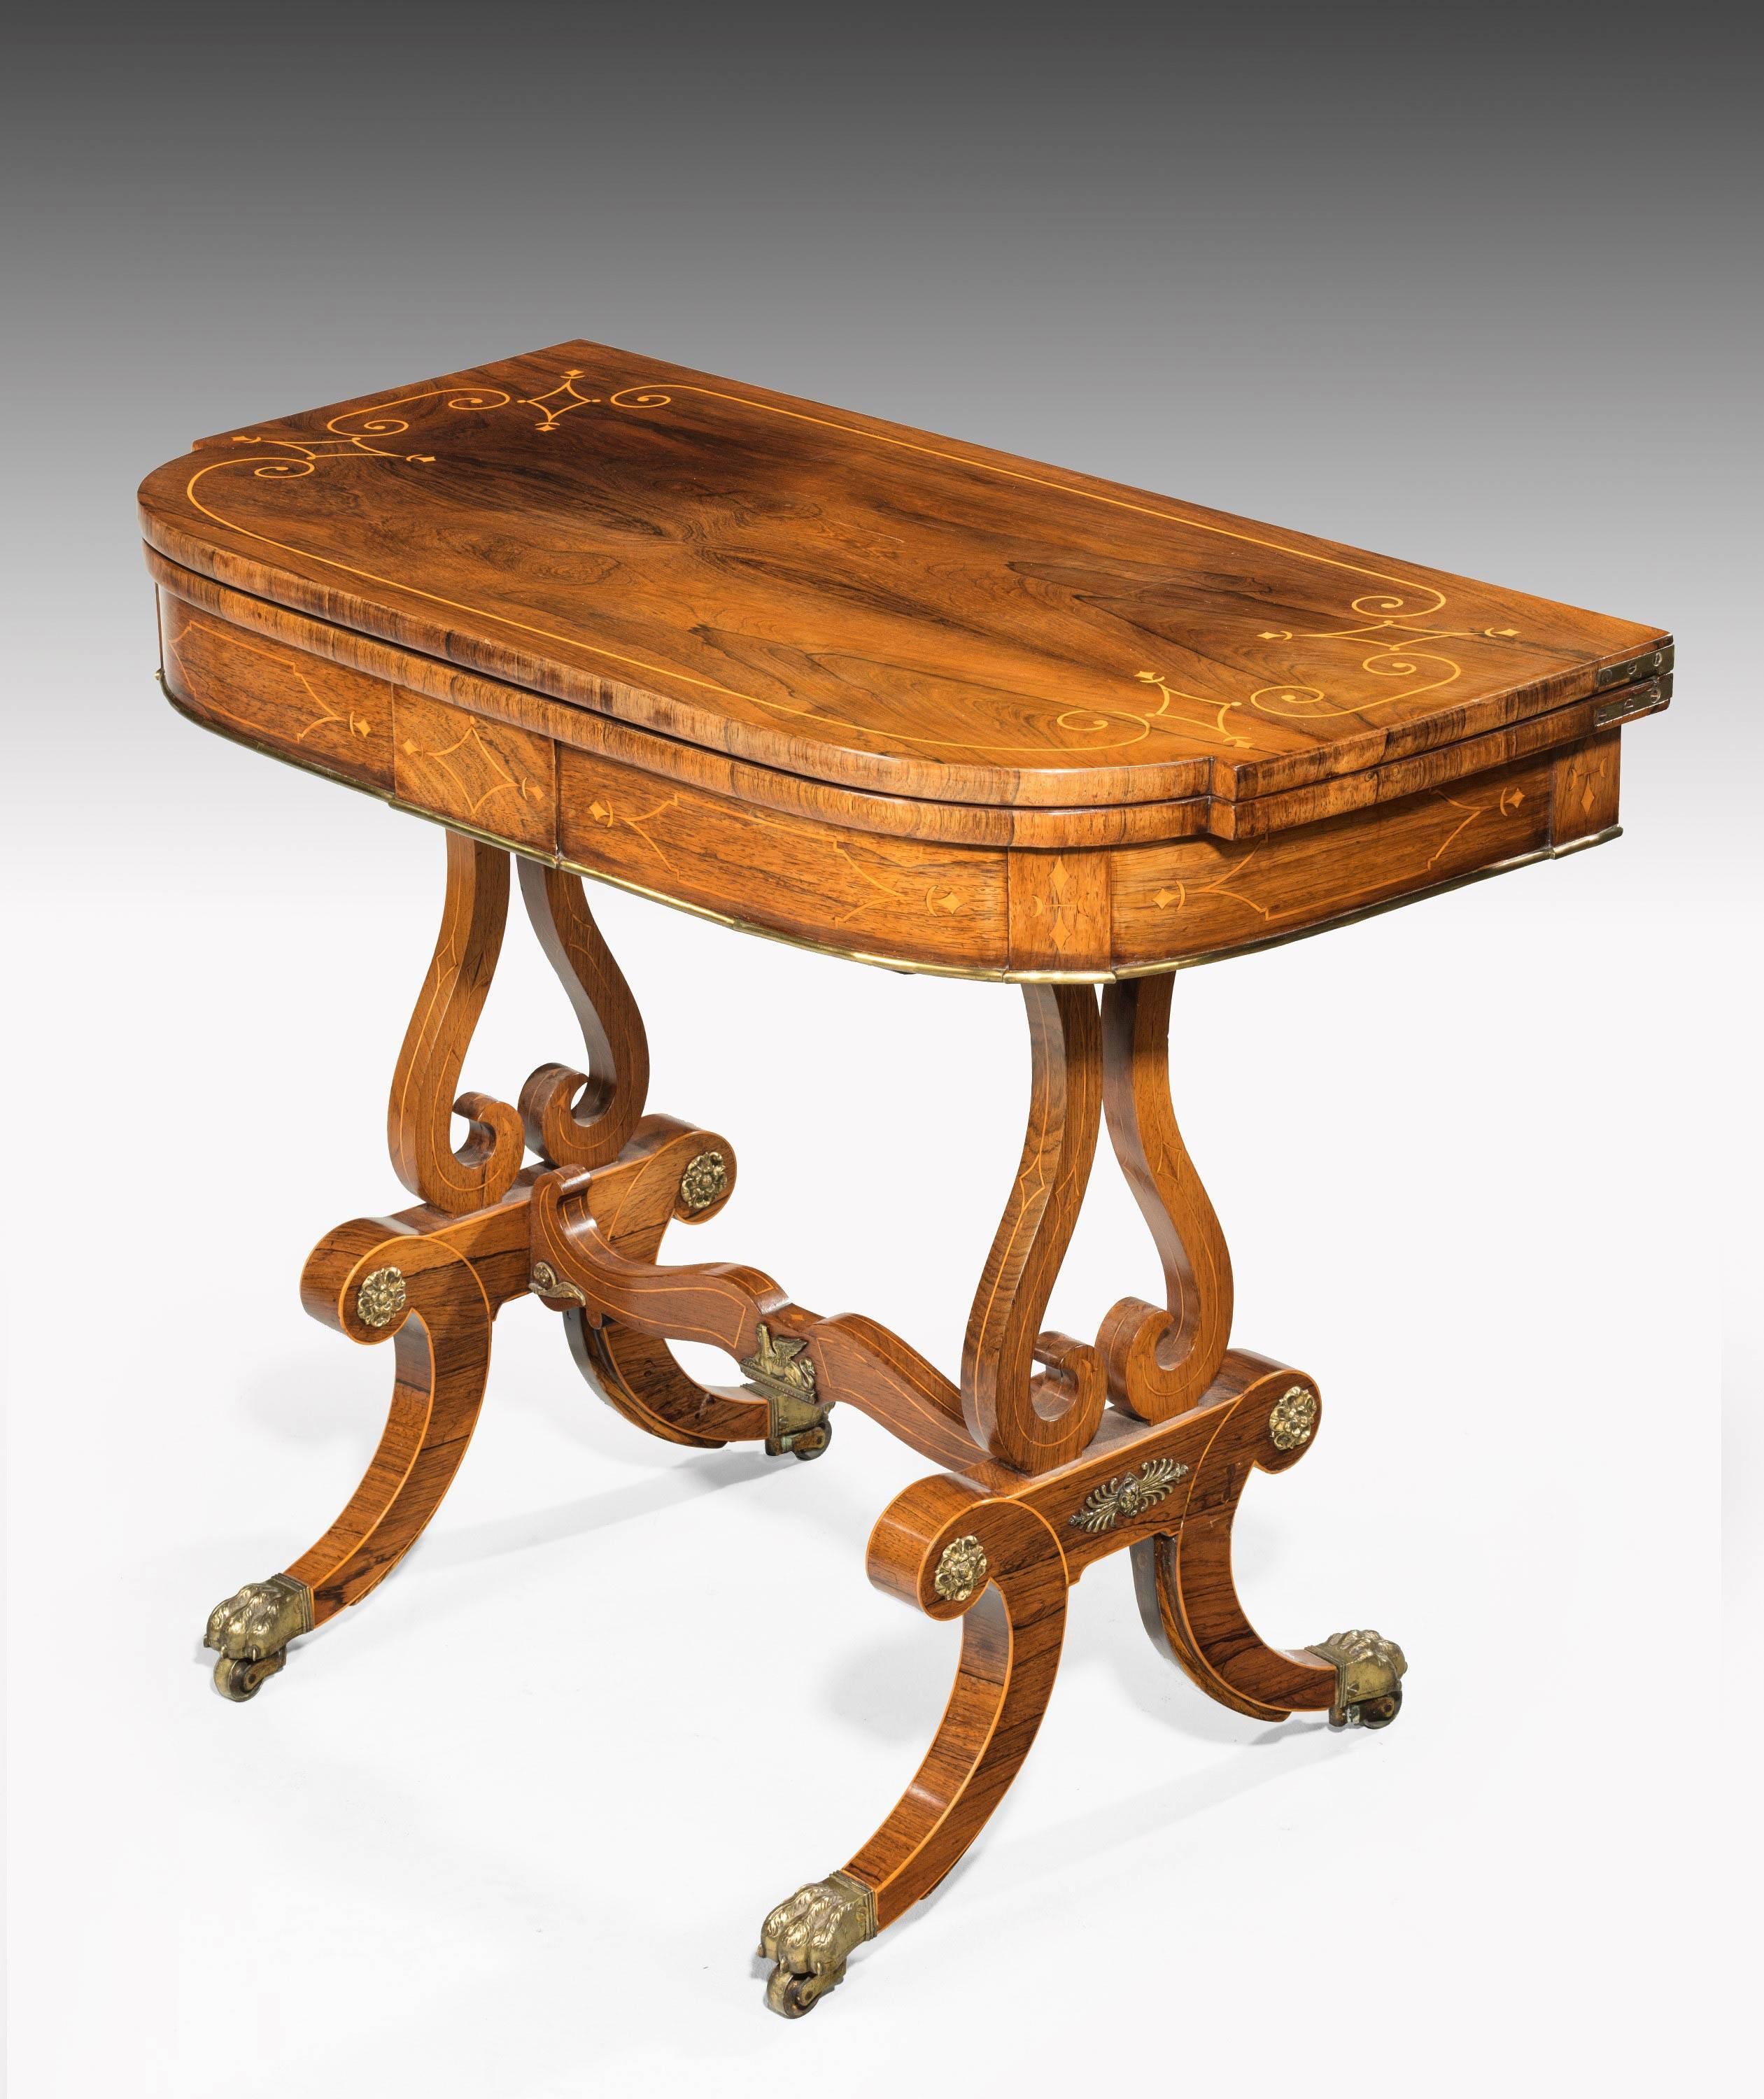 An exceptional Regency period rosewood card table with a broken bow front. The top edge crossbanded with finely shaped lyre supports with a wavy stretcher. Crossbanded on most of the surfaces with good English bronze mounts which are original. The